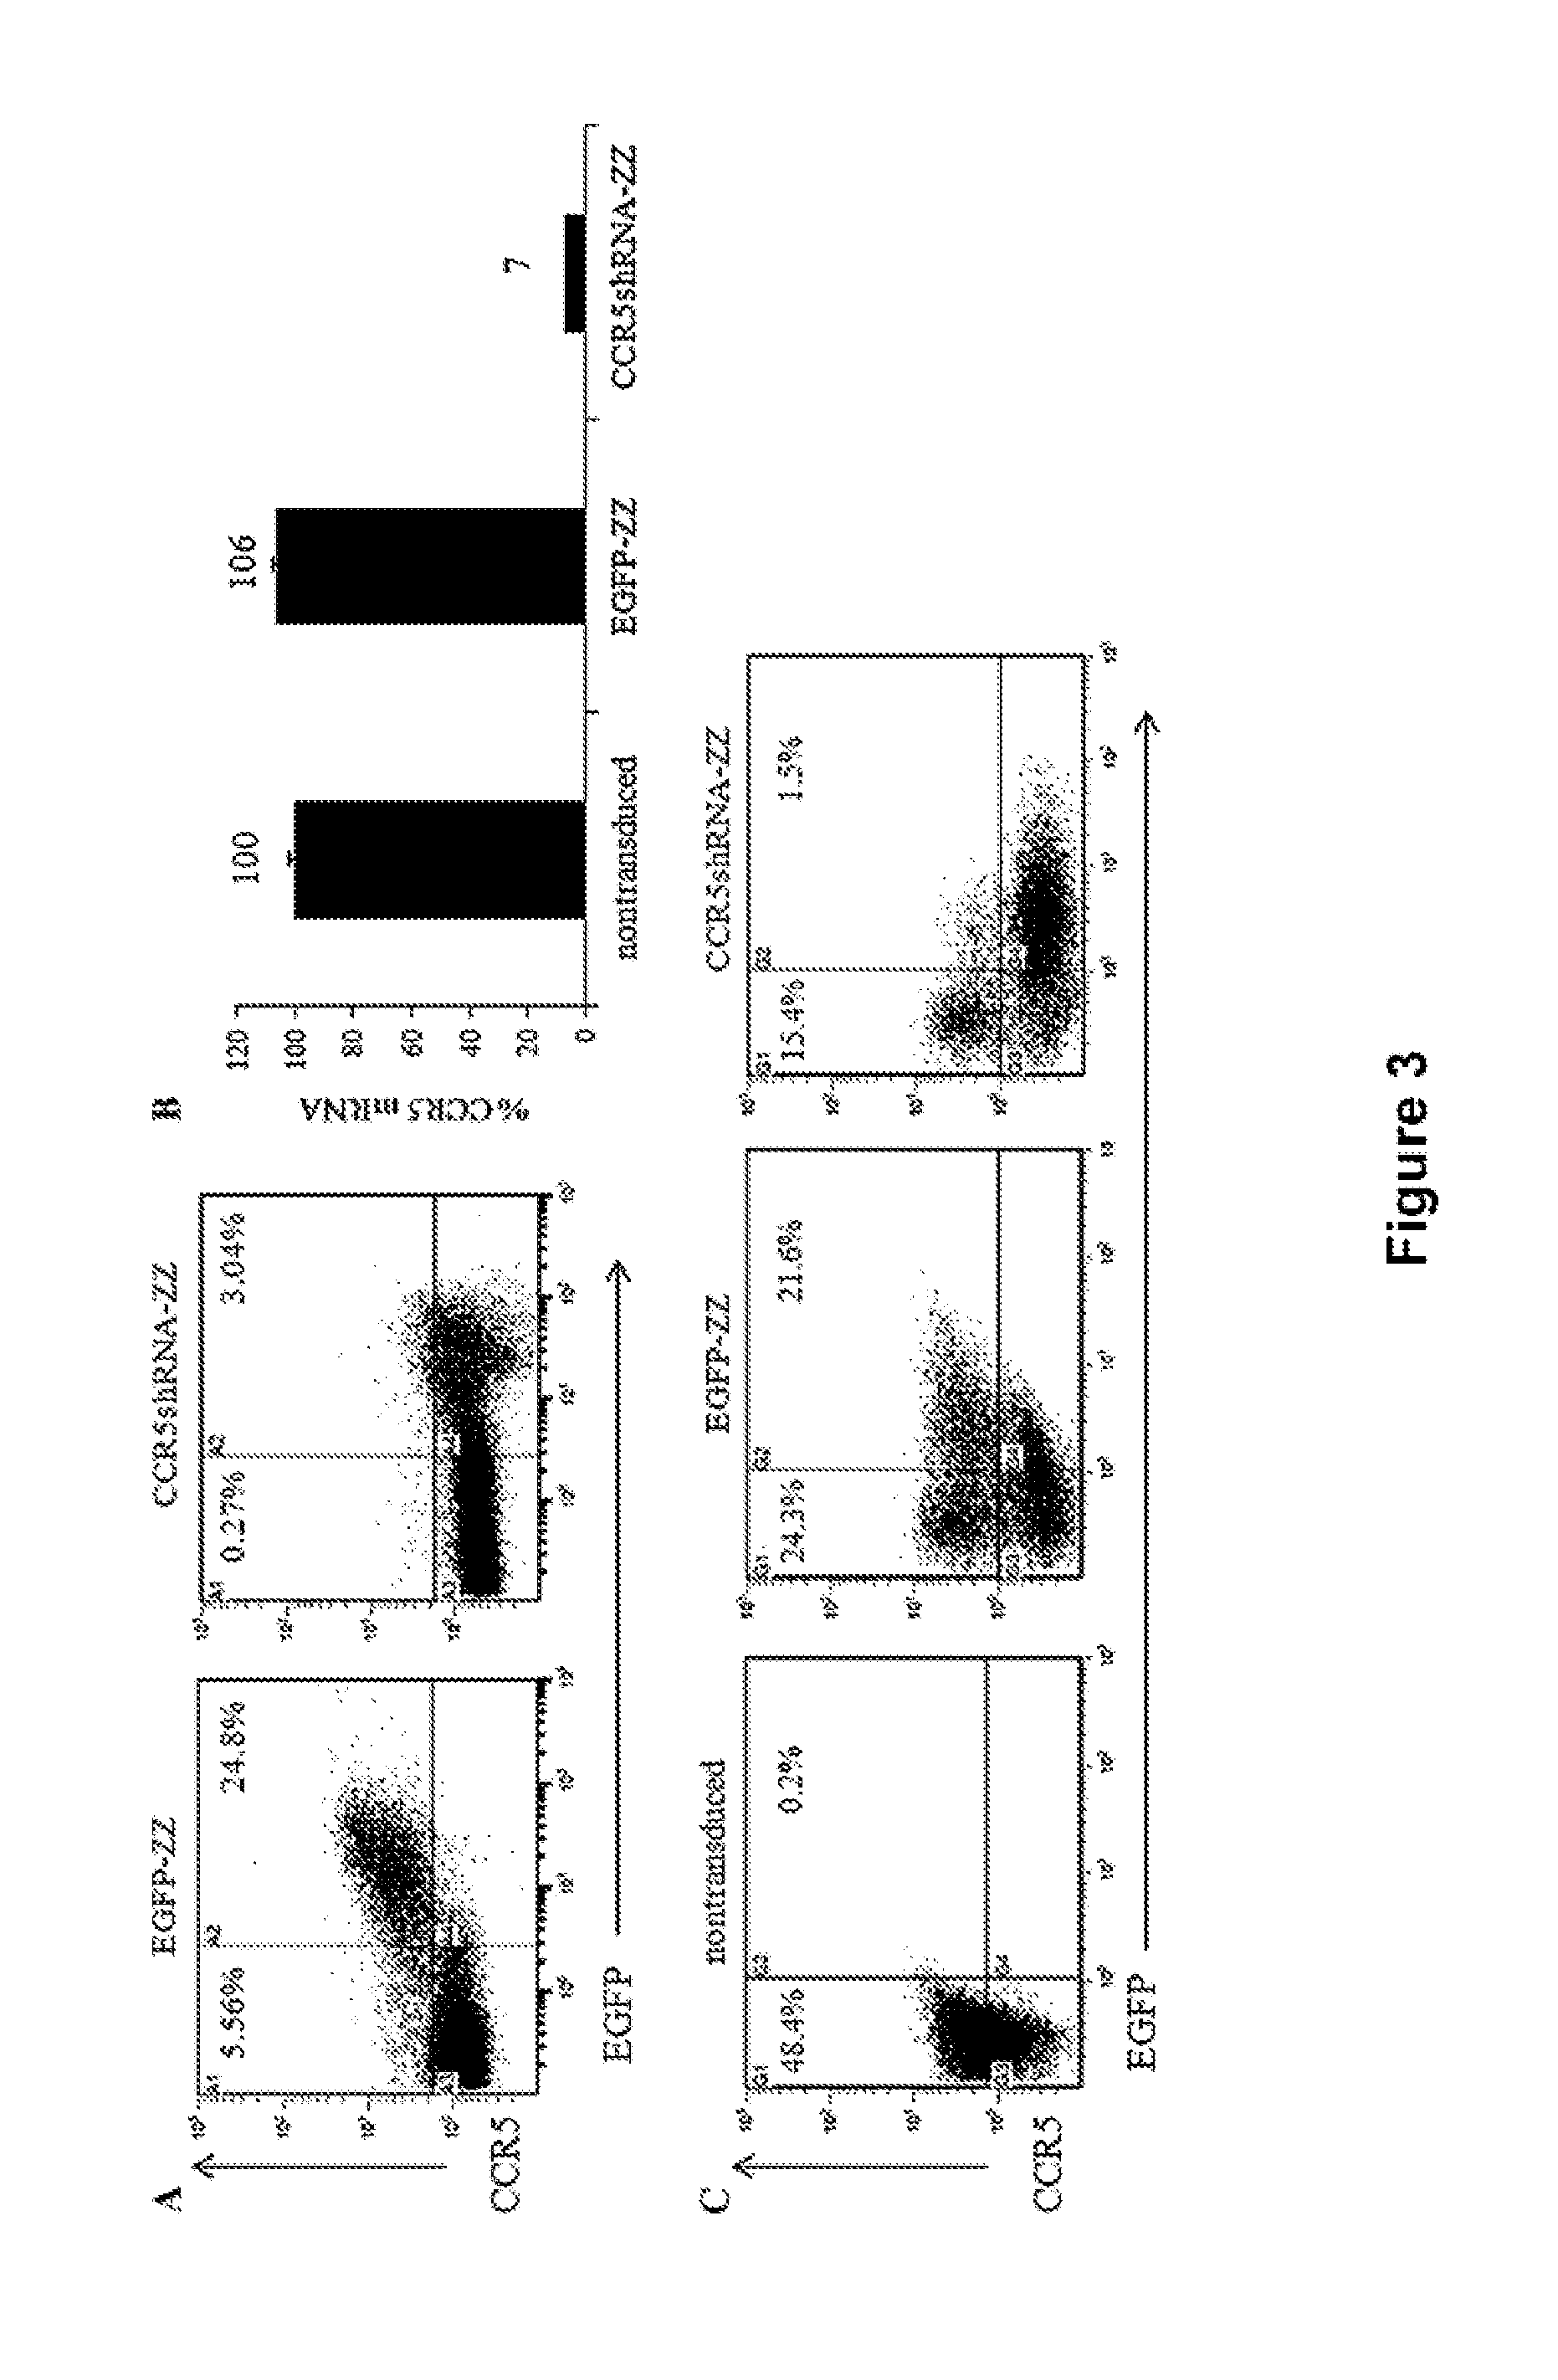 Combination Anti-hiv vectors, targeting vectors, and methods of use